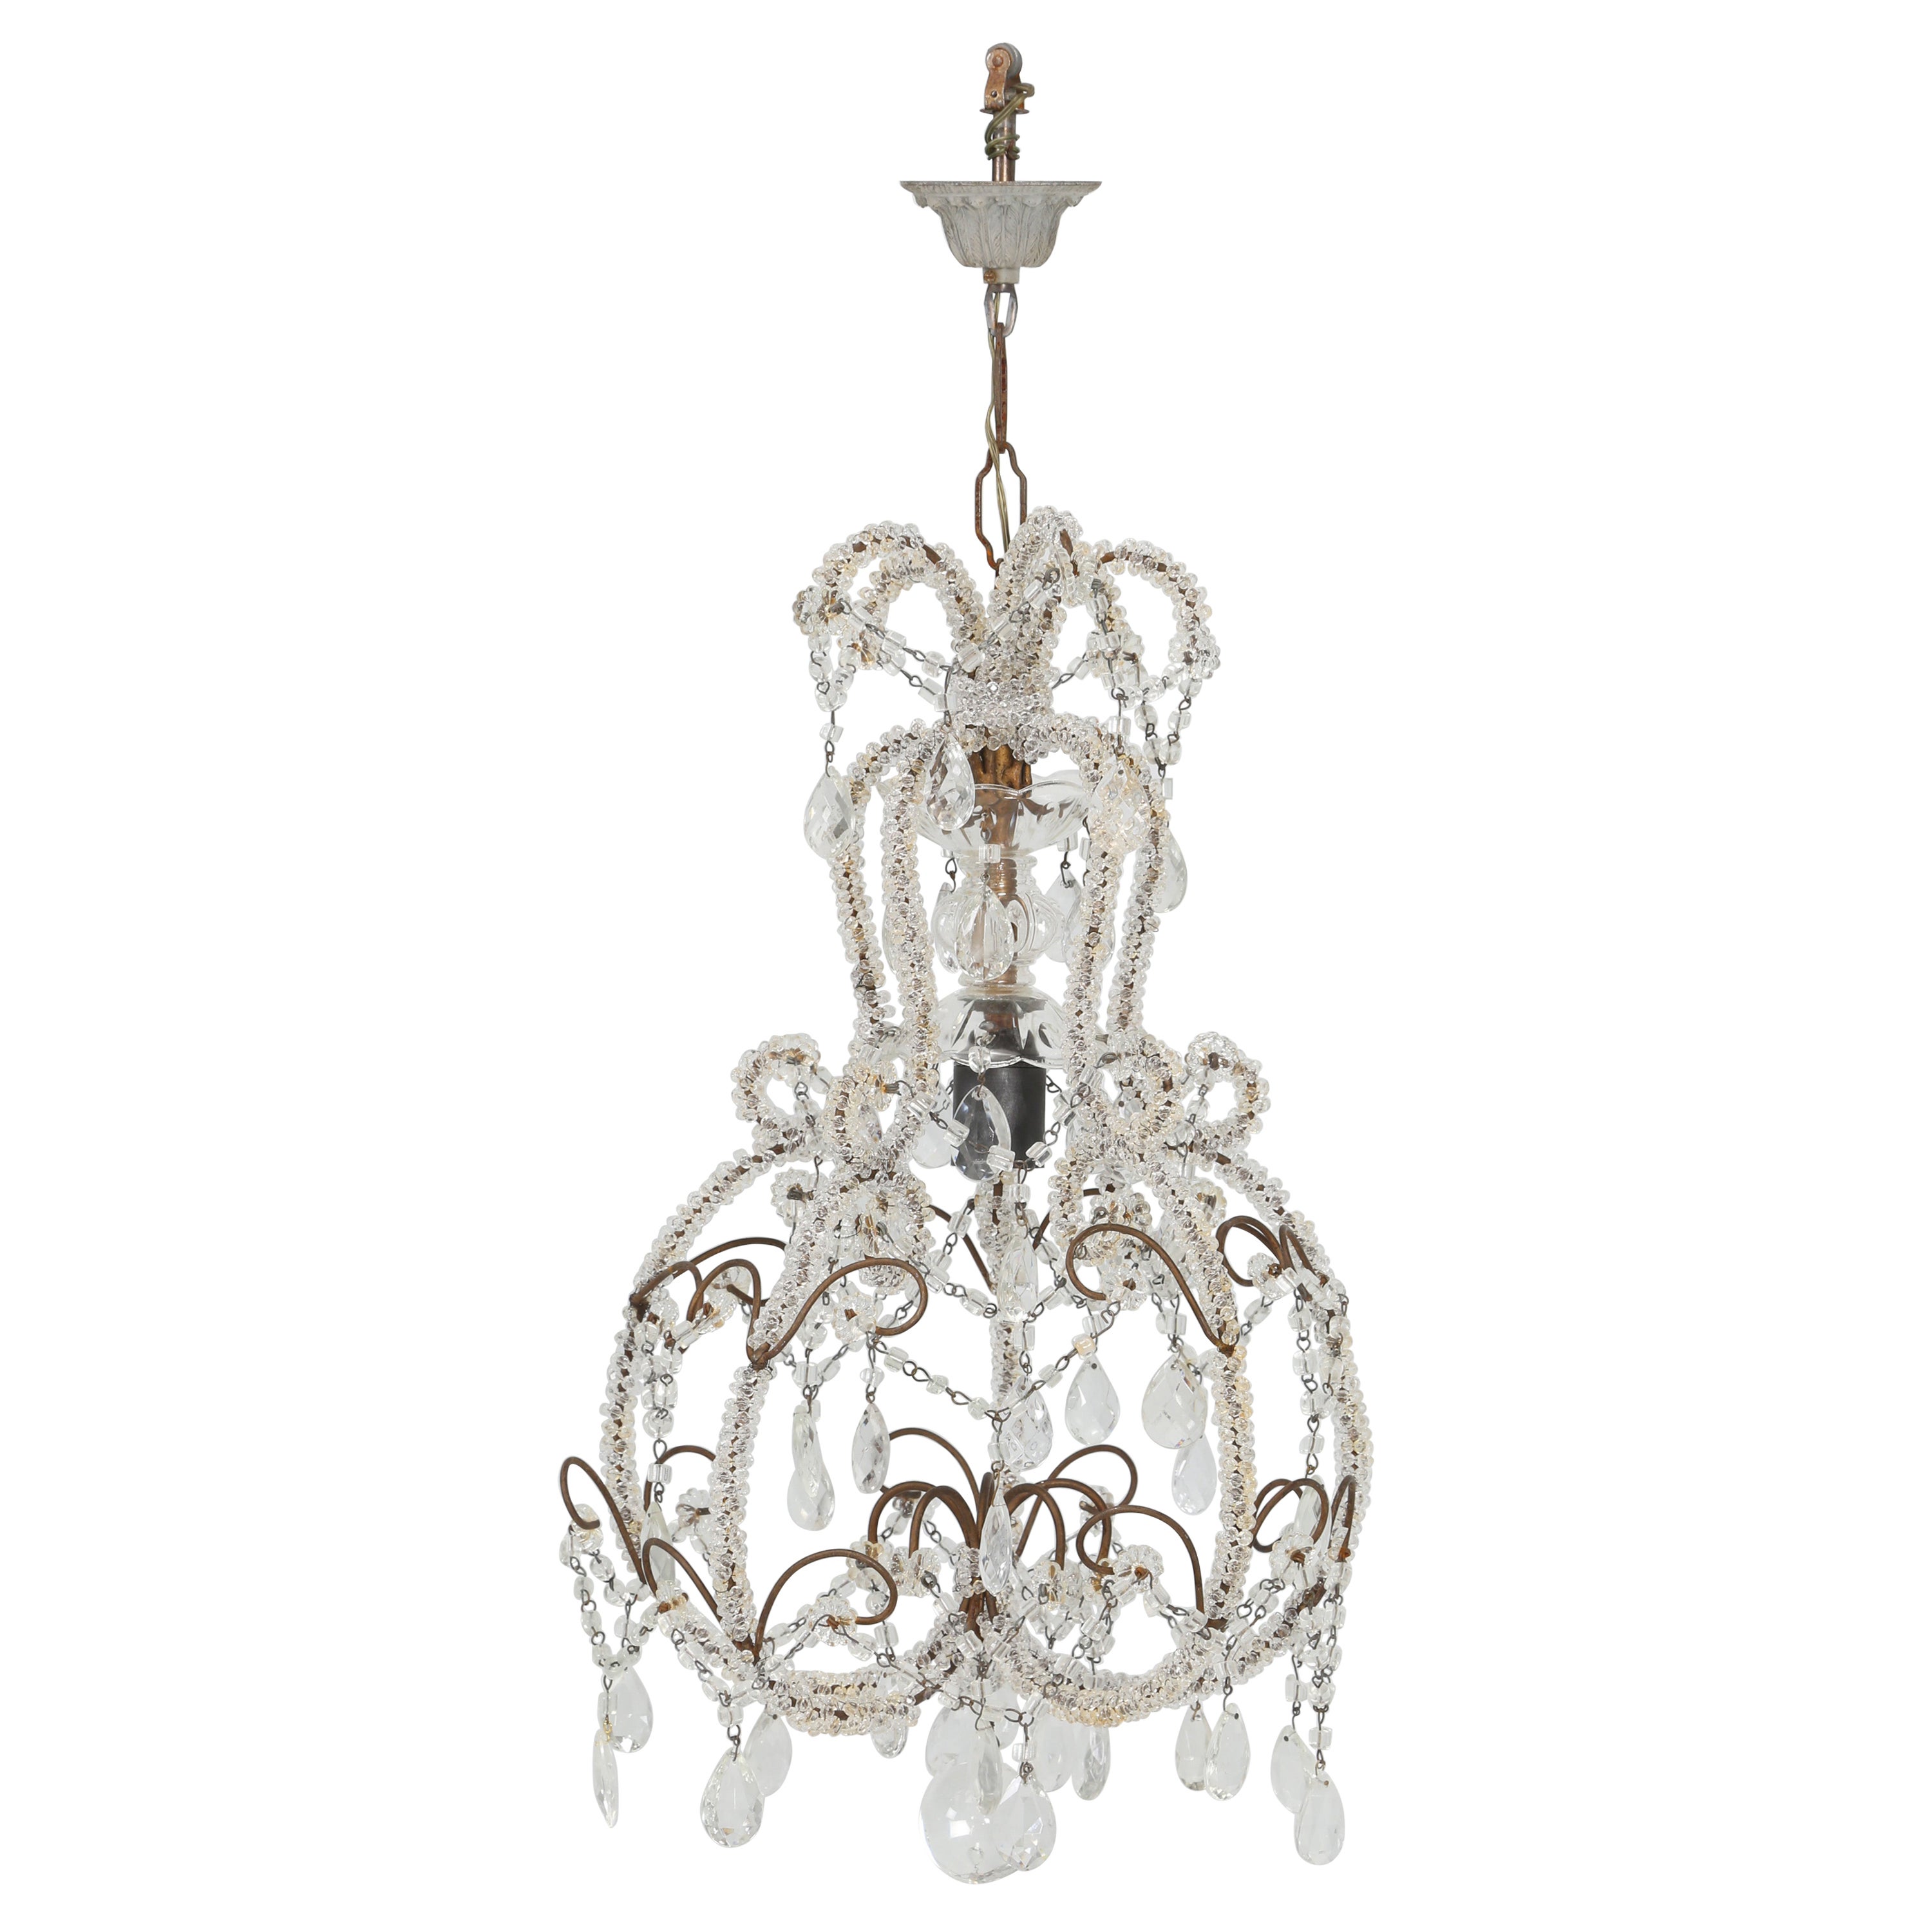 Vintage Italian Gilded Chandelier in a Small